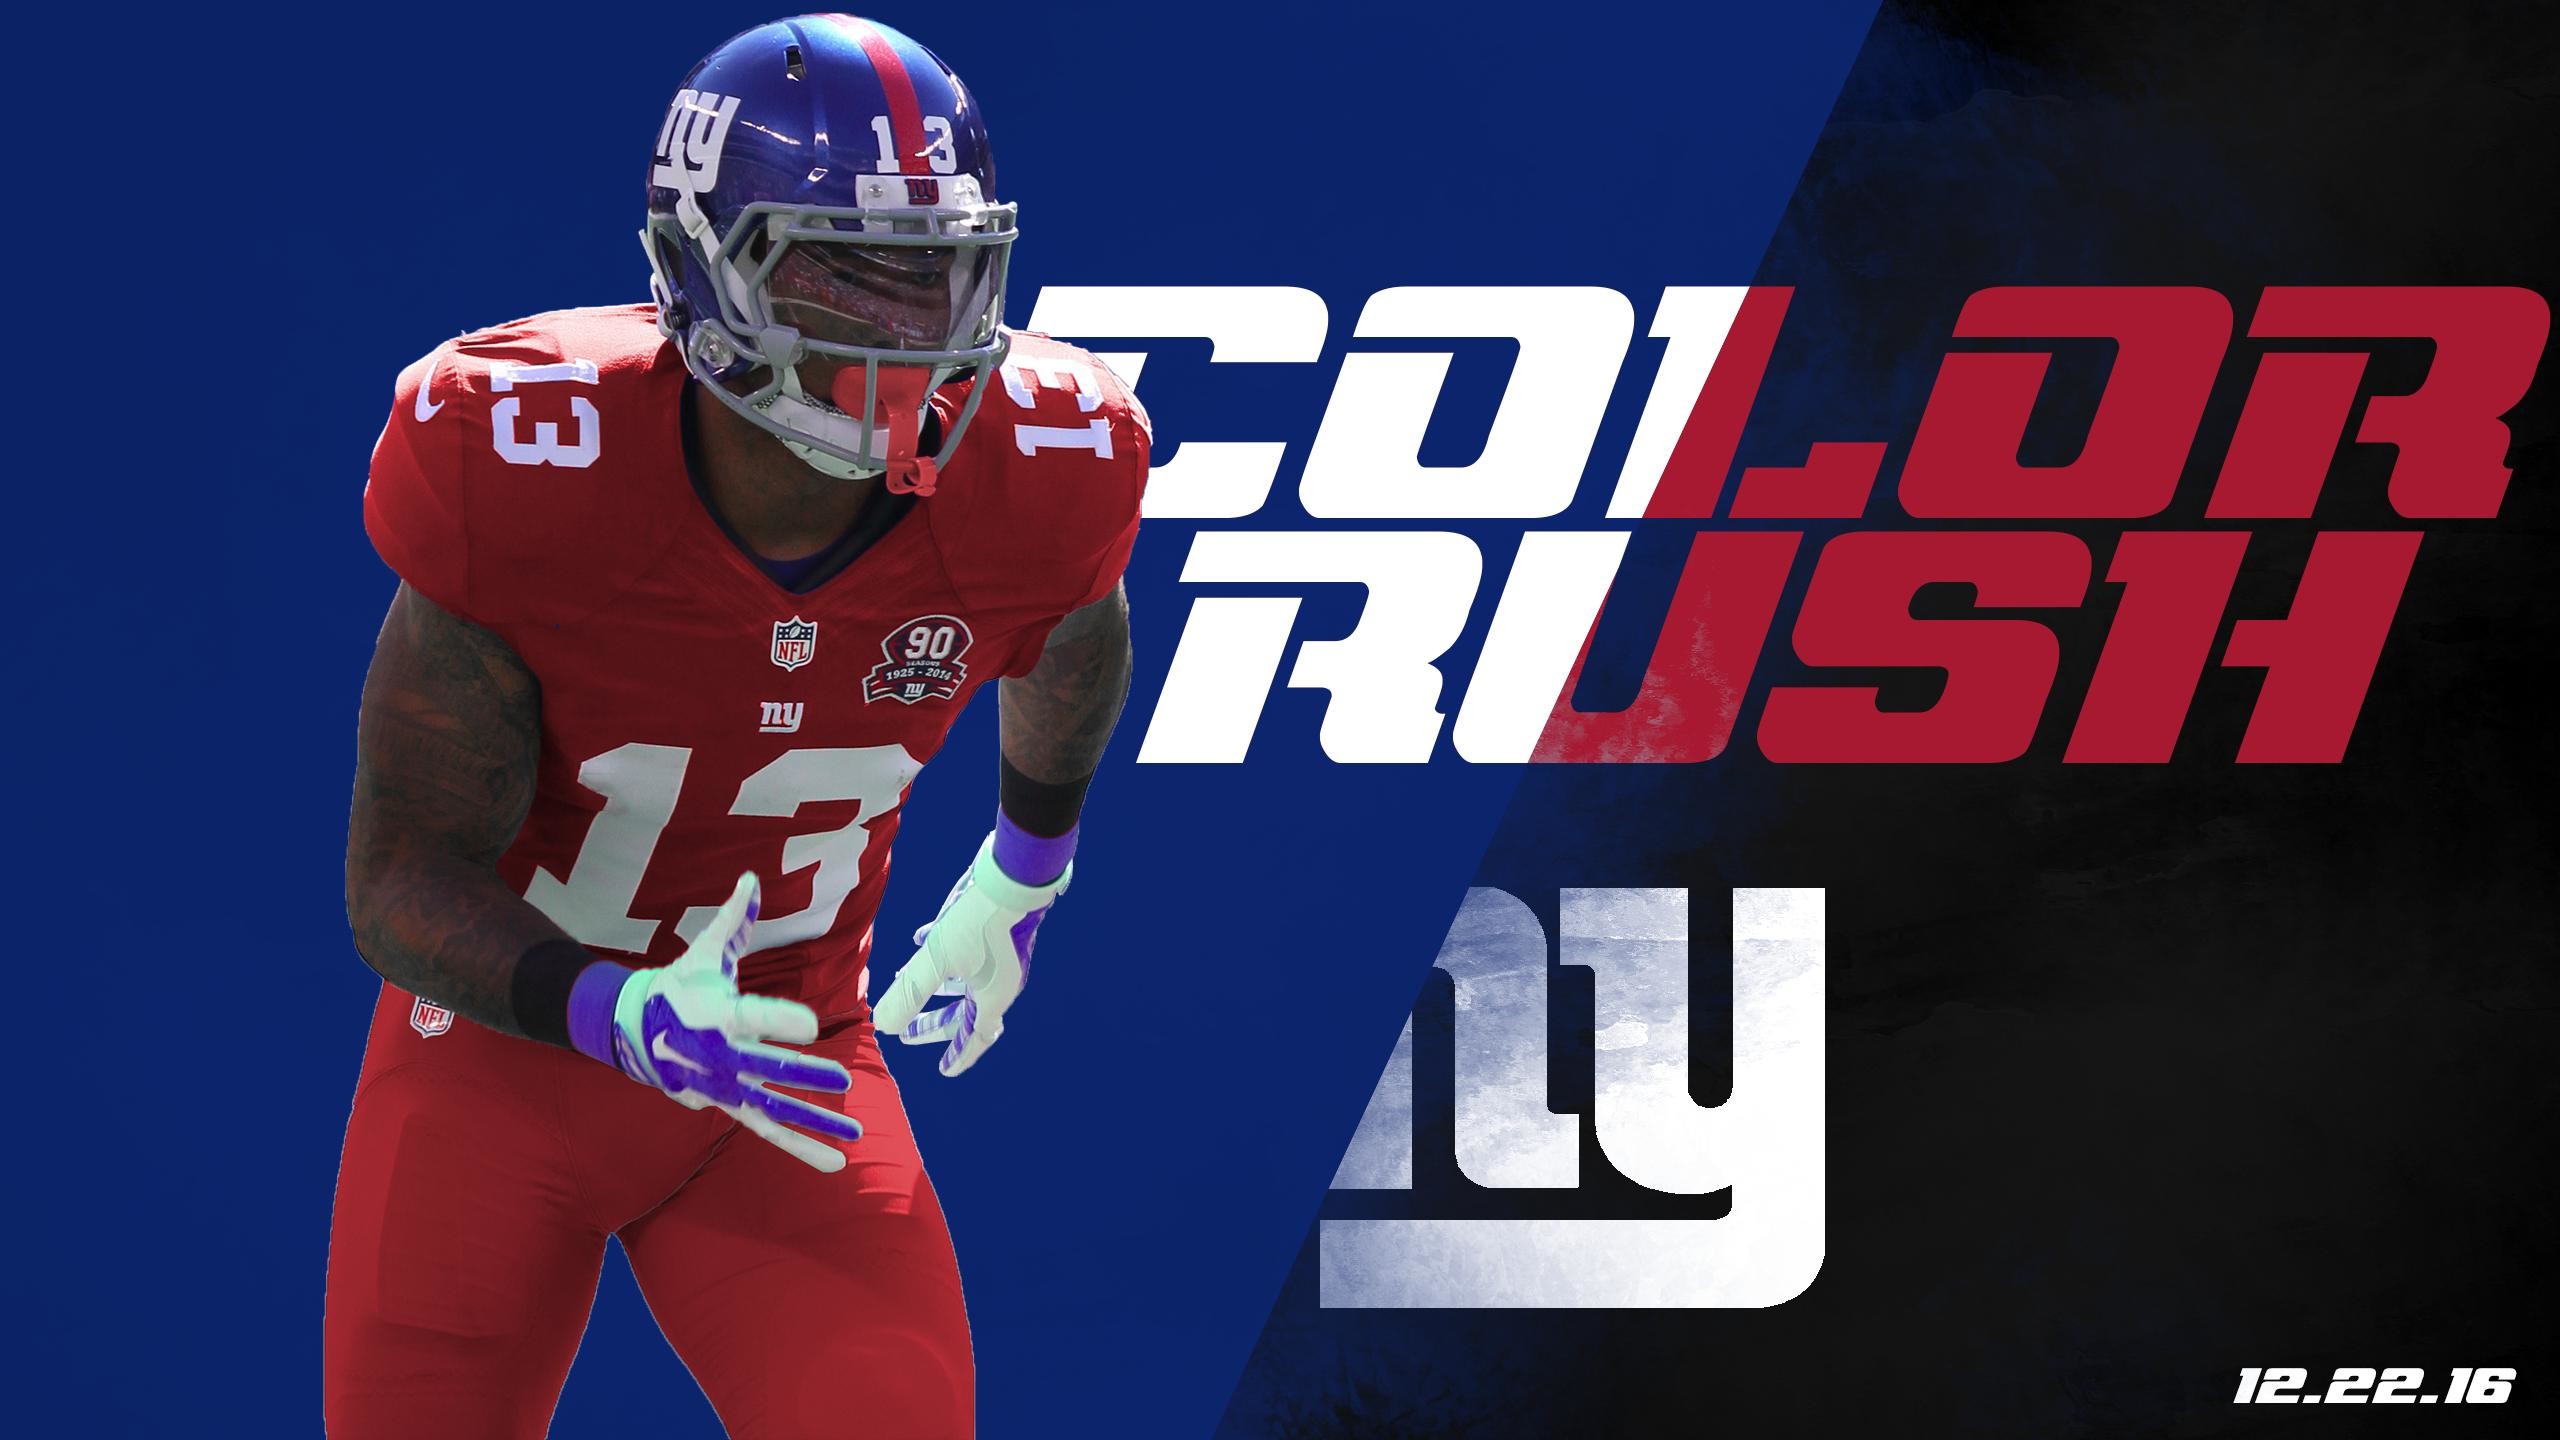 2560x1440 ... the giants will wear color rush uni's on december 22 this year vs the  eagles. as you can see, i swapped the jersey, pants, mouth guard, and  gloves.